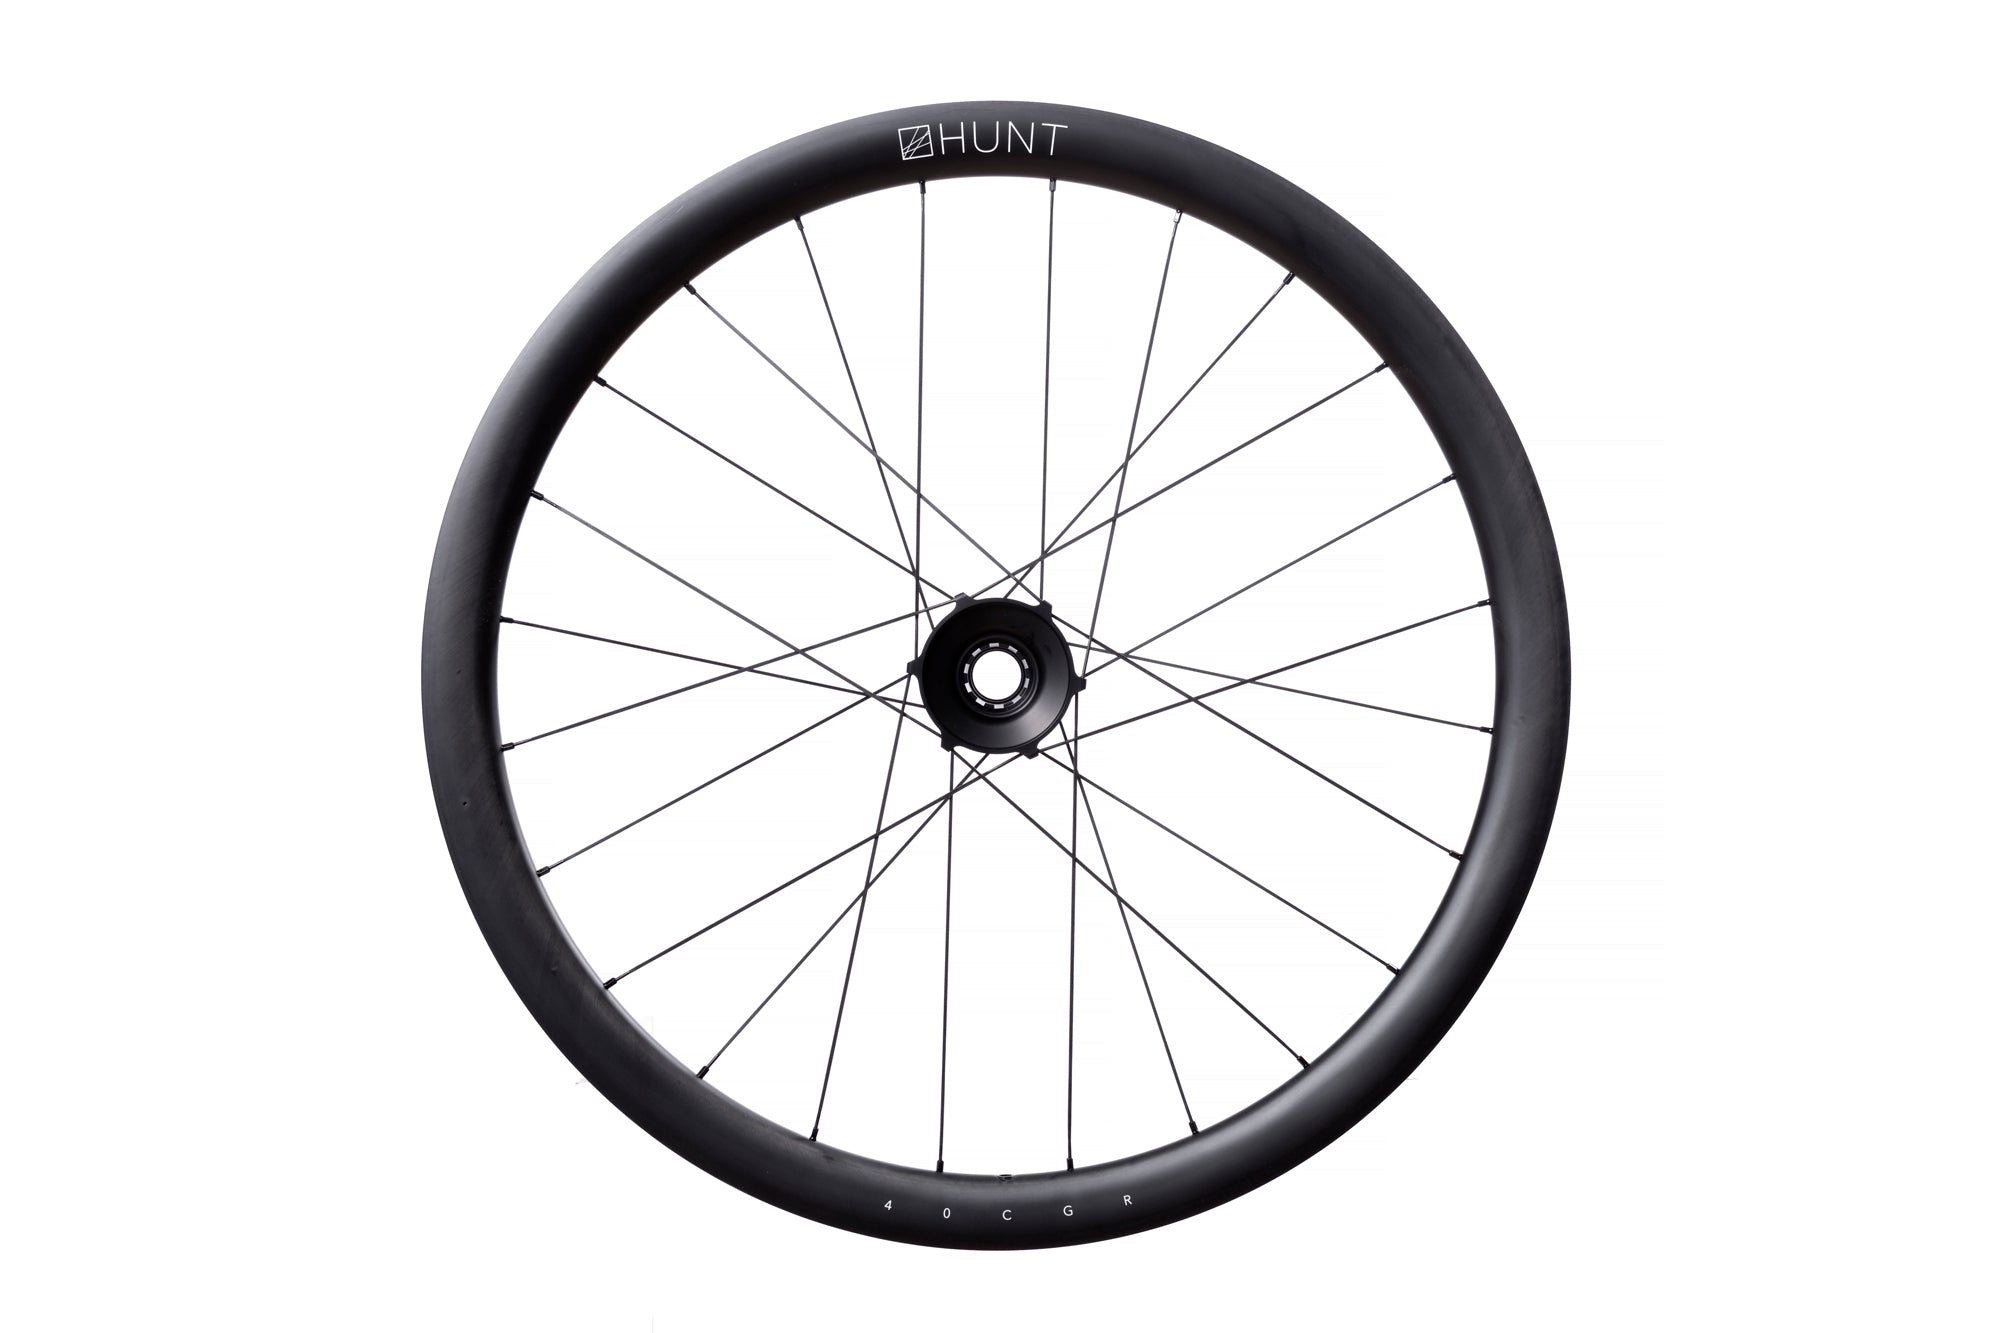 <h1>RIM PROFILE</h1><i>When designing a wheelset with absolute lightness and off-road capabilities as the driving principle, then a hookless rim profile is the right choice.</i>